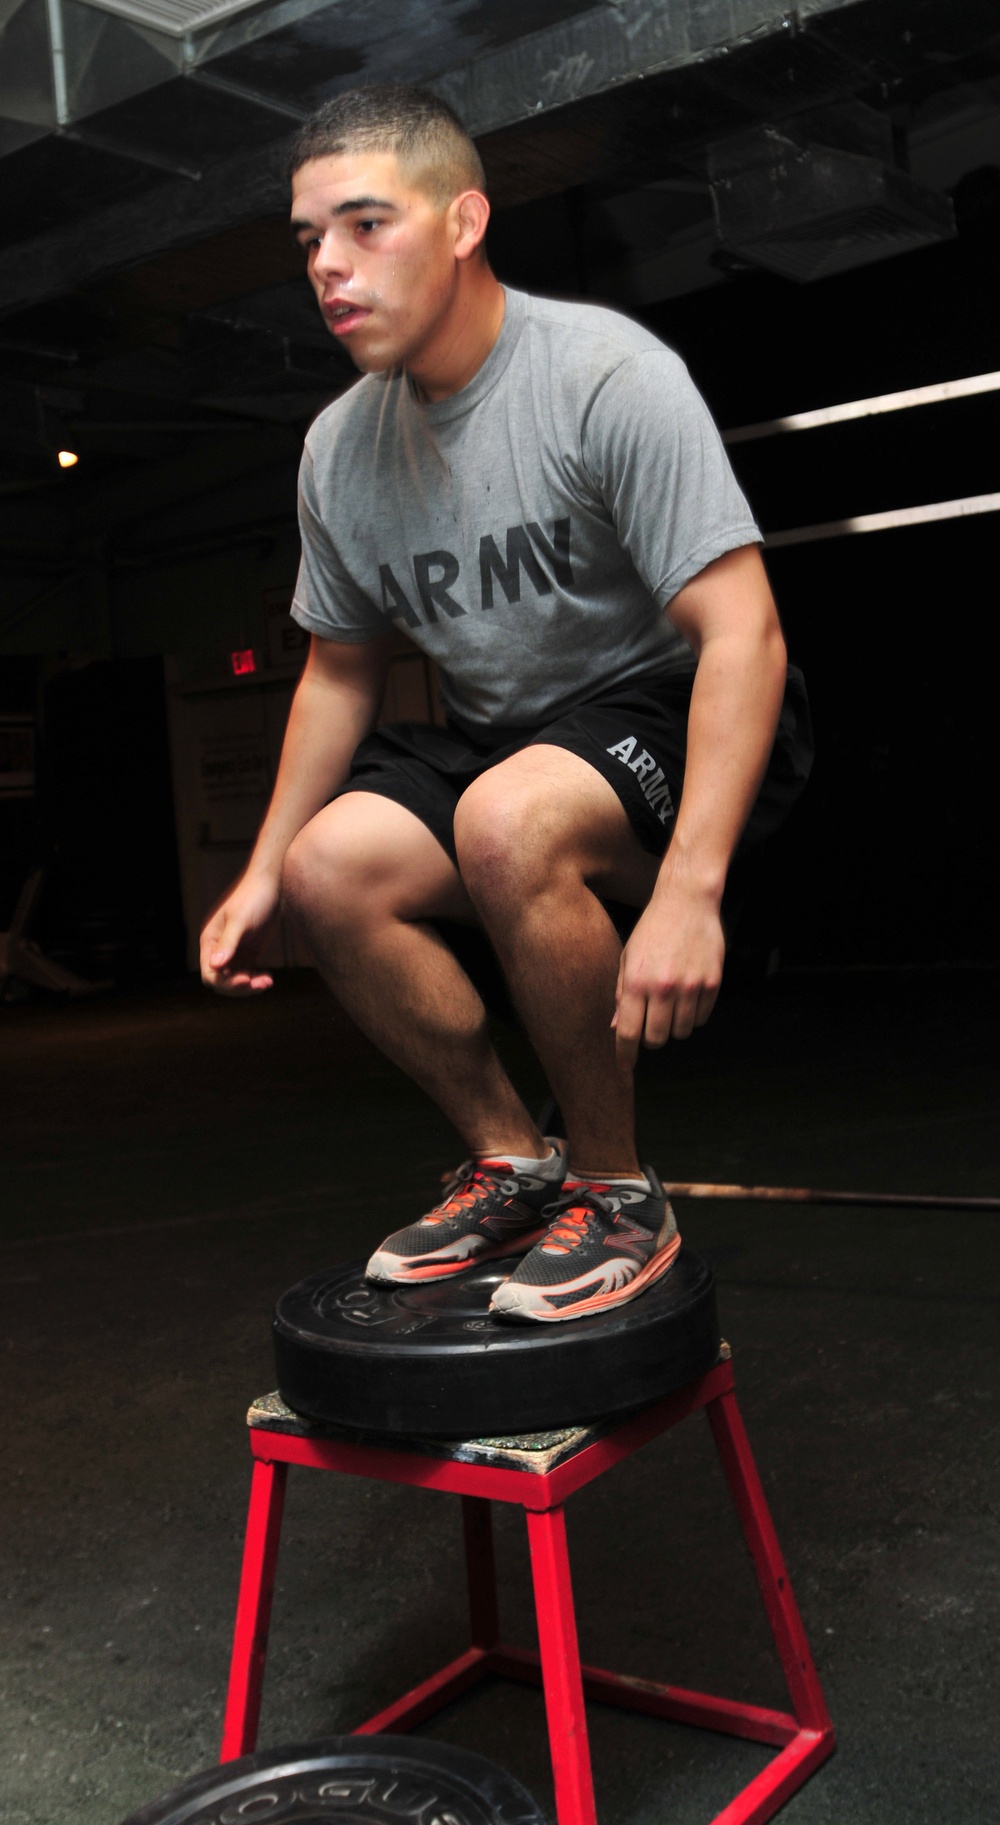 Soldier demonstrates box jumps